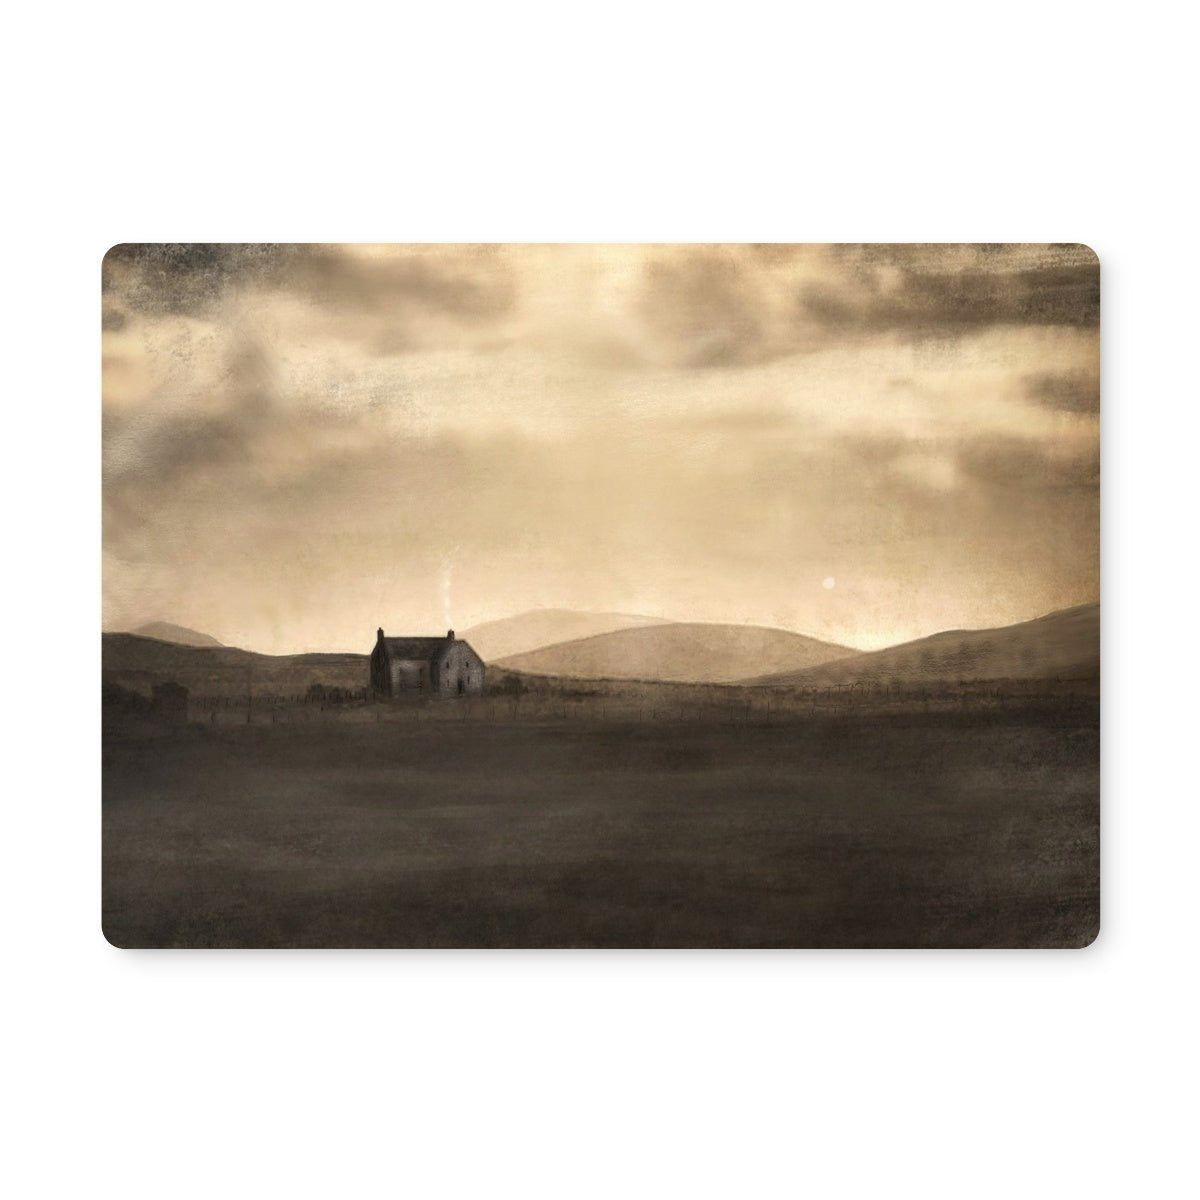 A Moonlit Croft Art Gifts Placemat-Placemats-Hebridean Islands Art Gallery-6 Placemats-Paintings, Prints, Homeware, Art Gifts From Scotland By Scottish Artist Kevin Hunter